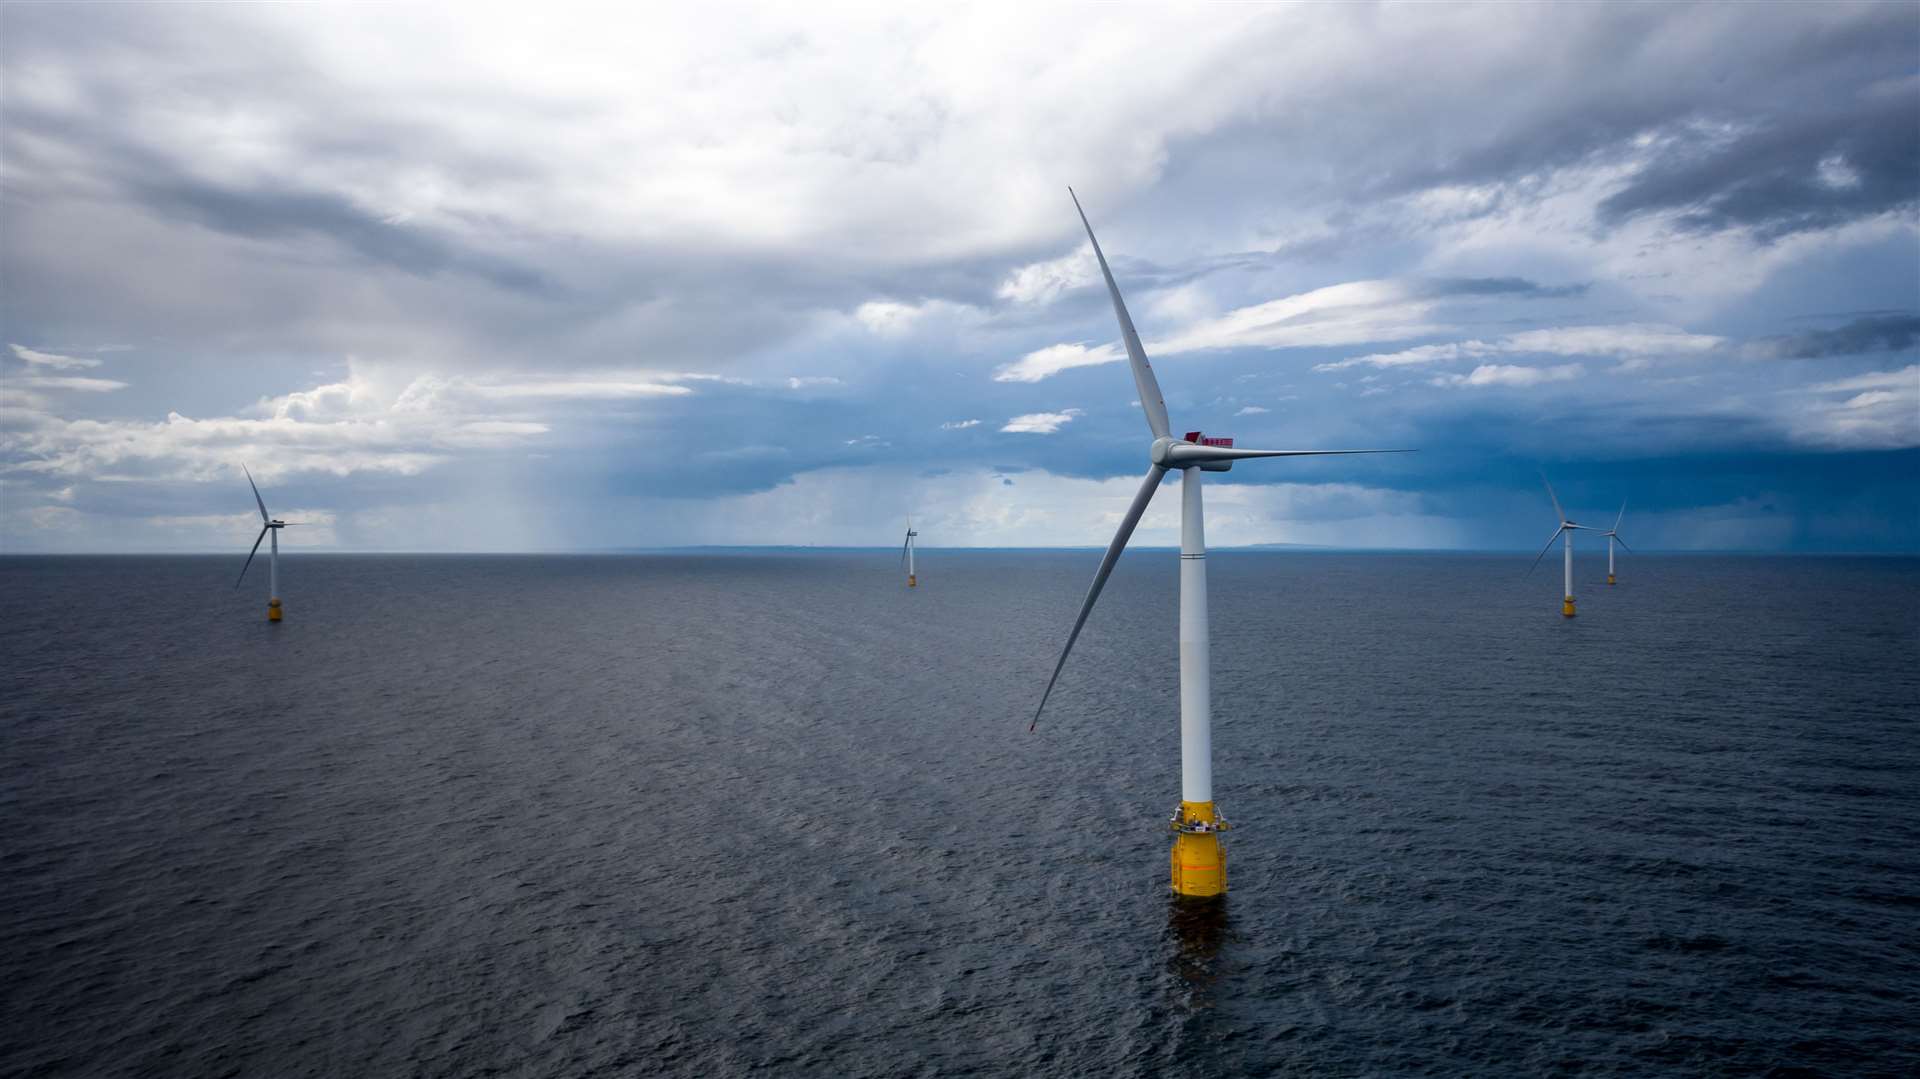 Floating wind technology, as used in this project off Peterhead, offers potential for jobs but other factors need to be considered too, says Matthew Reiss. Picture: Oyvind Gravas